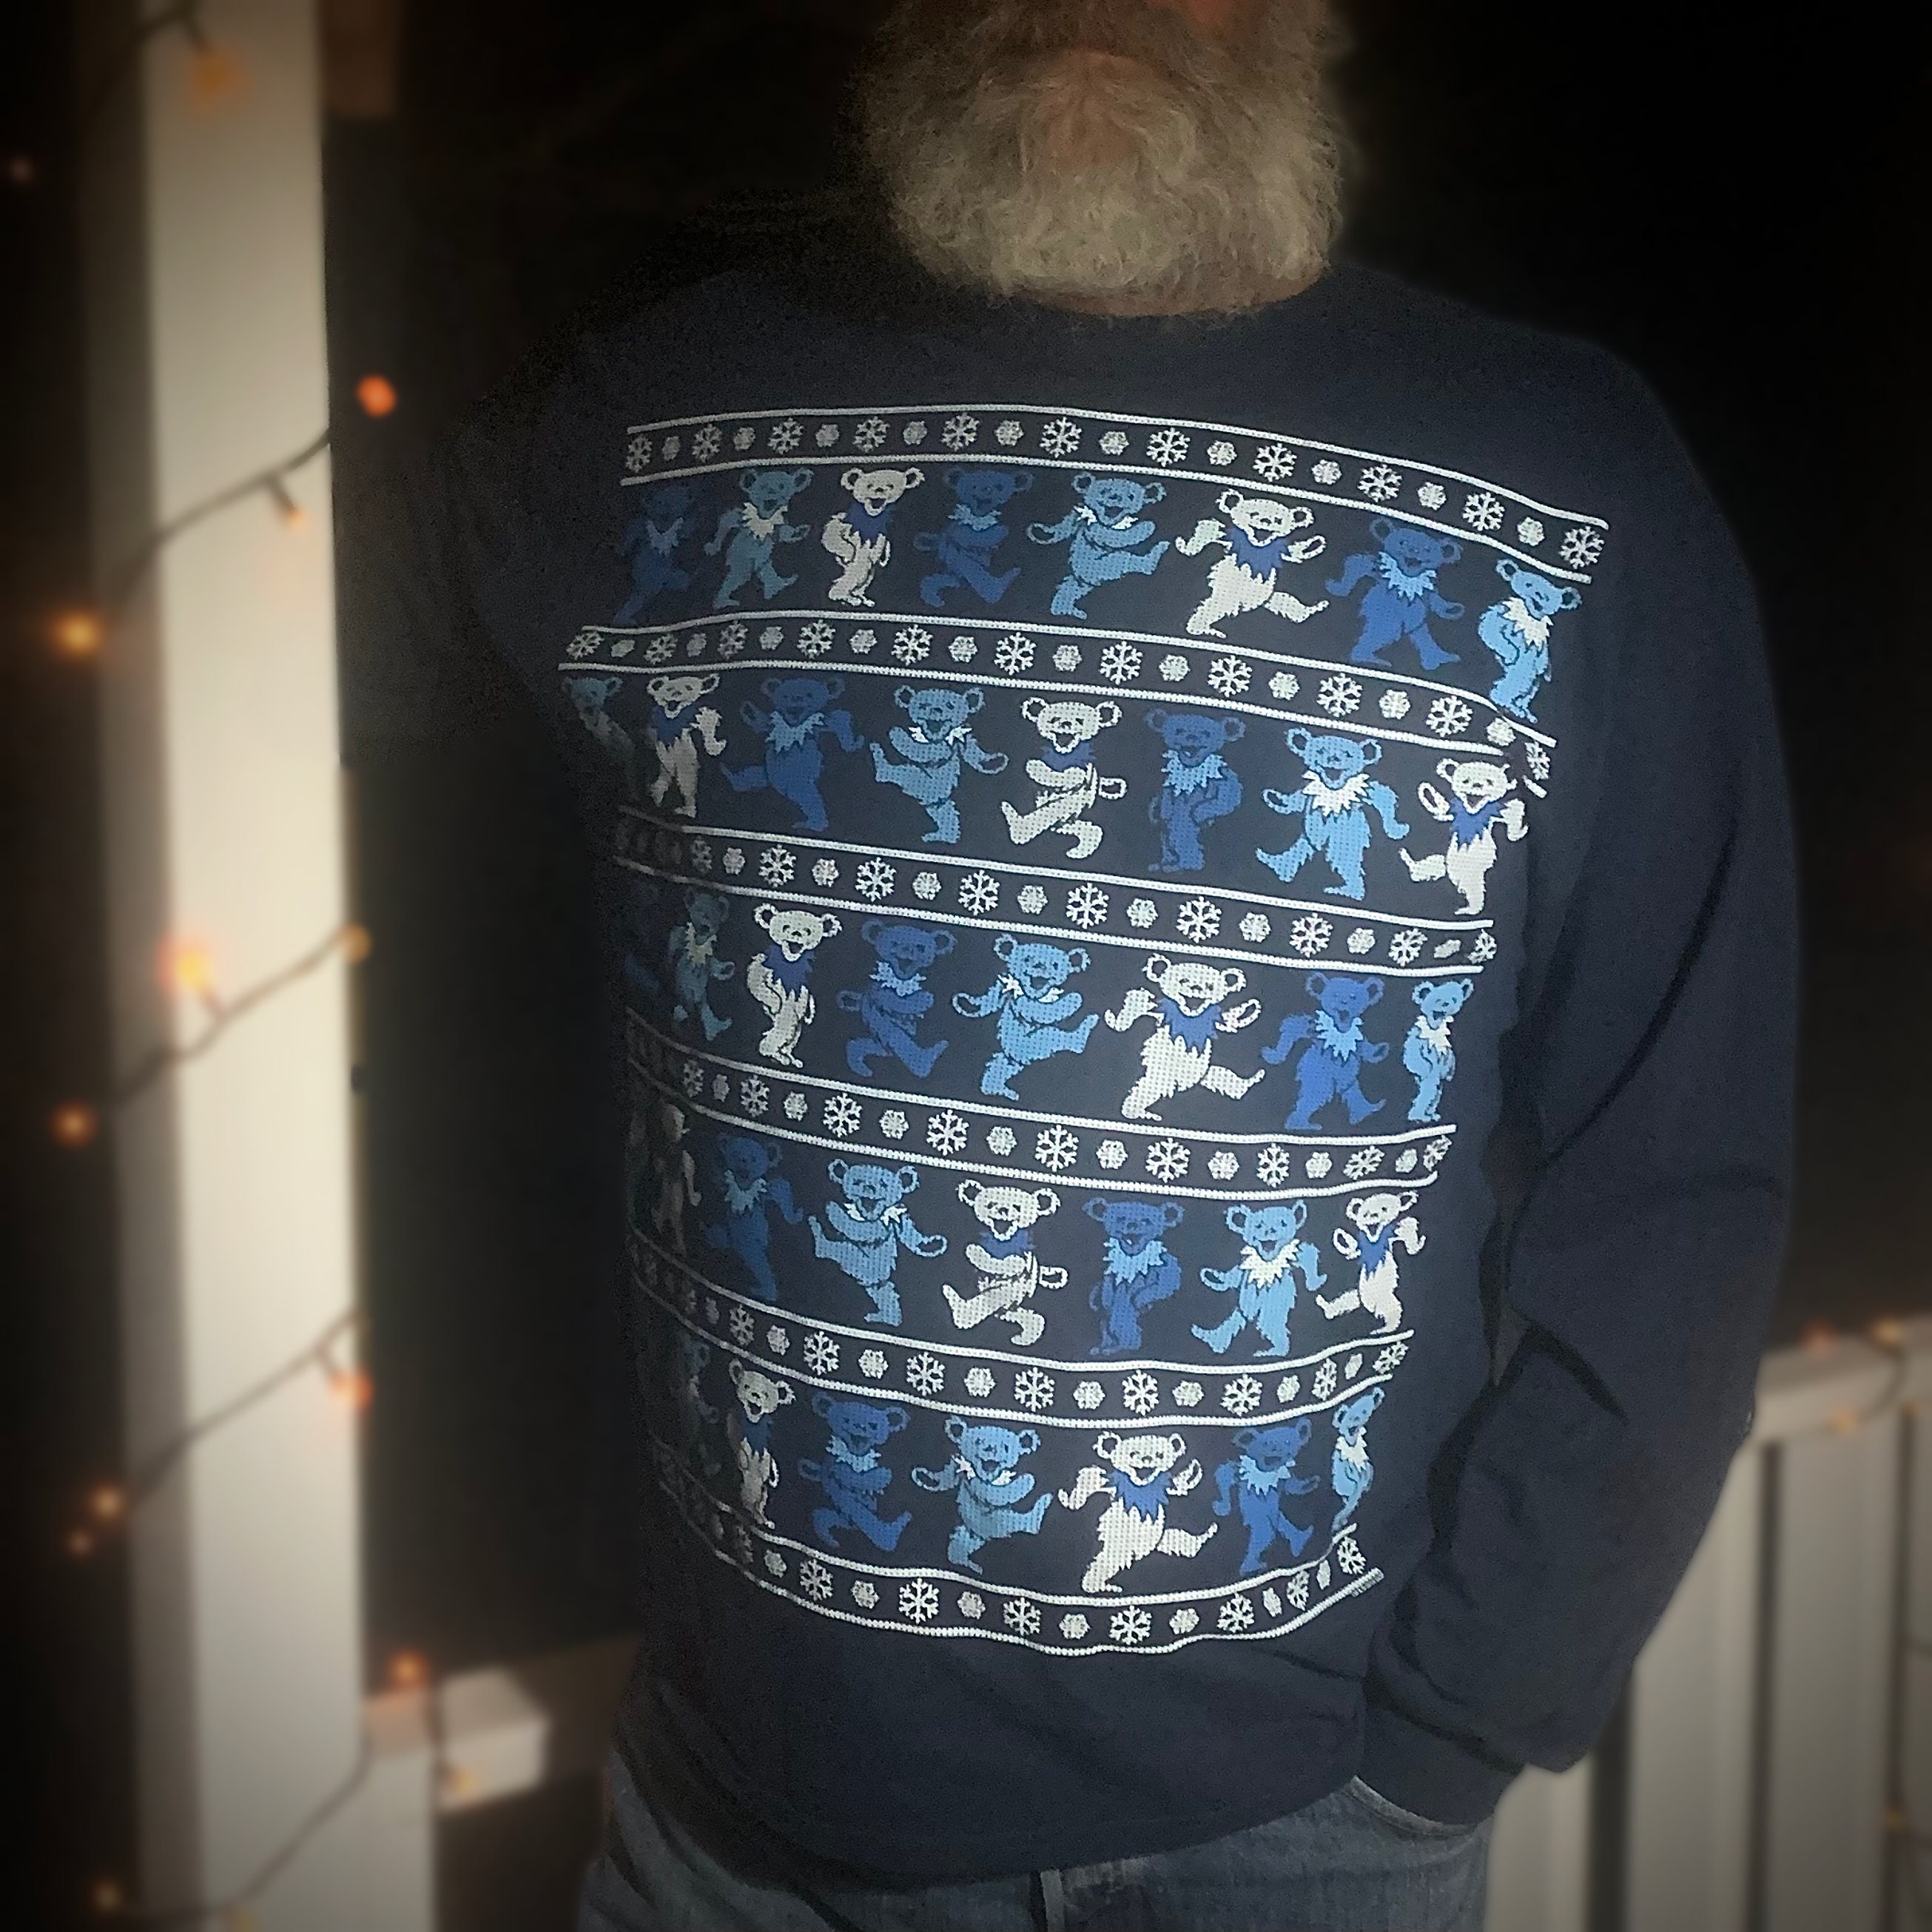 Jerry Garcia Grateful Dead Rock Band Ugly Christmas Sweater